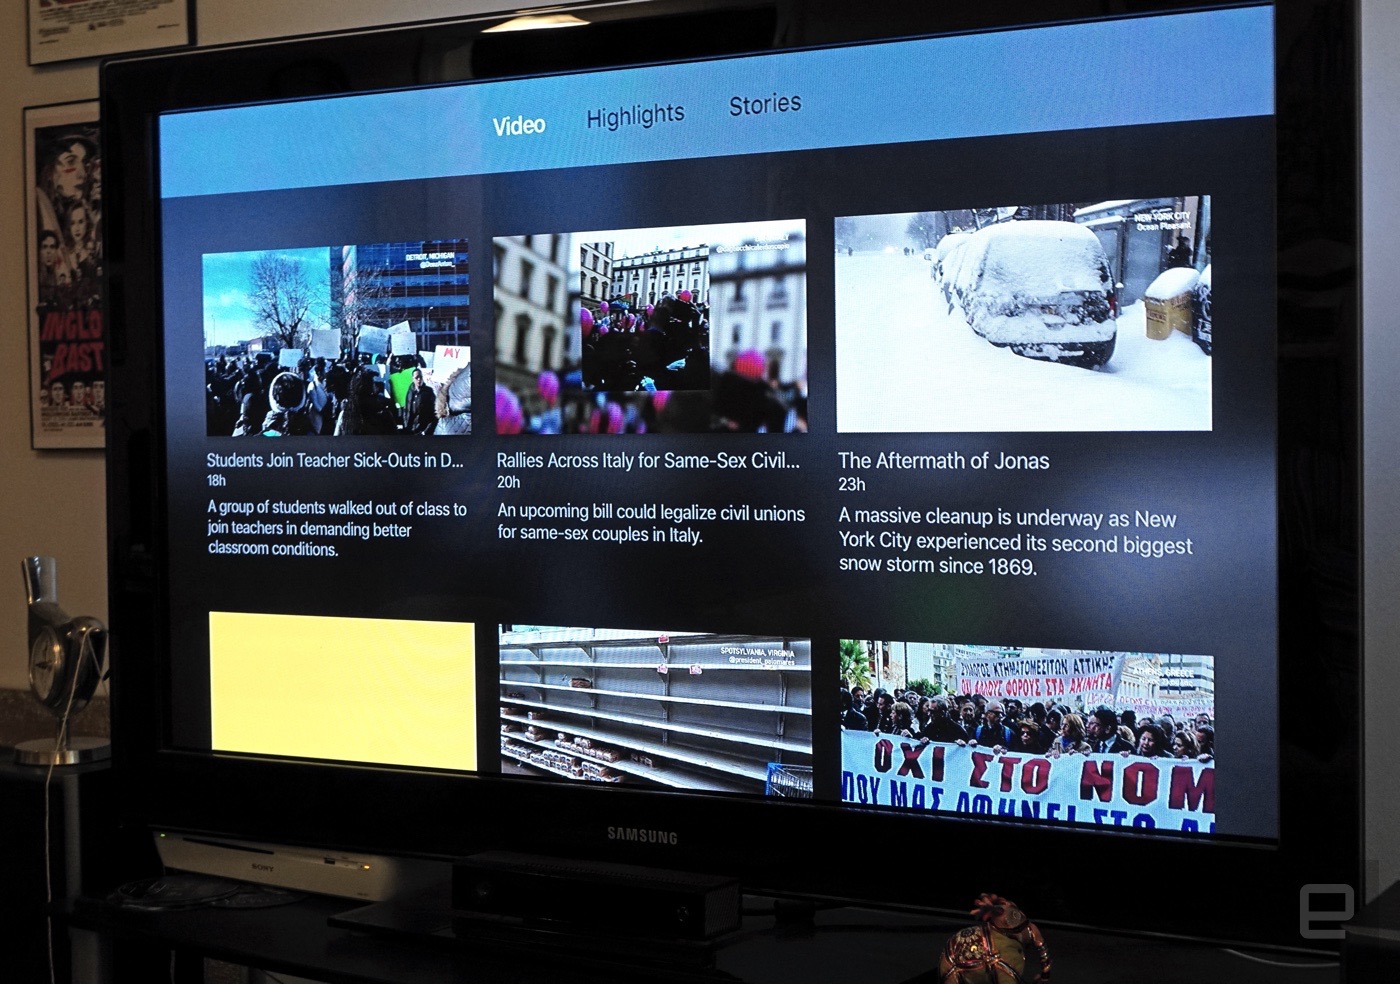 Fresco News brings its citizen journalism to Apple TV